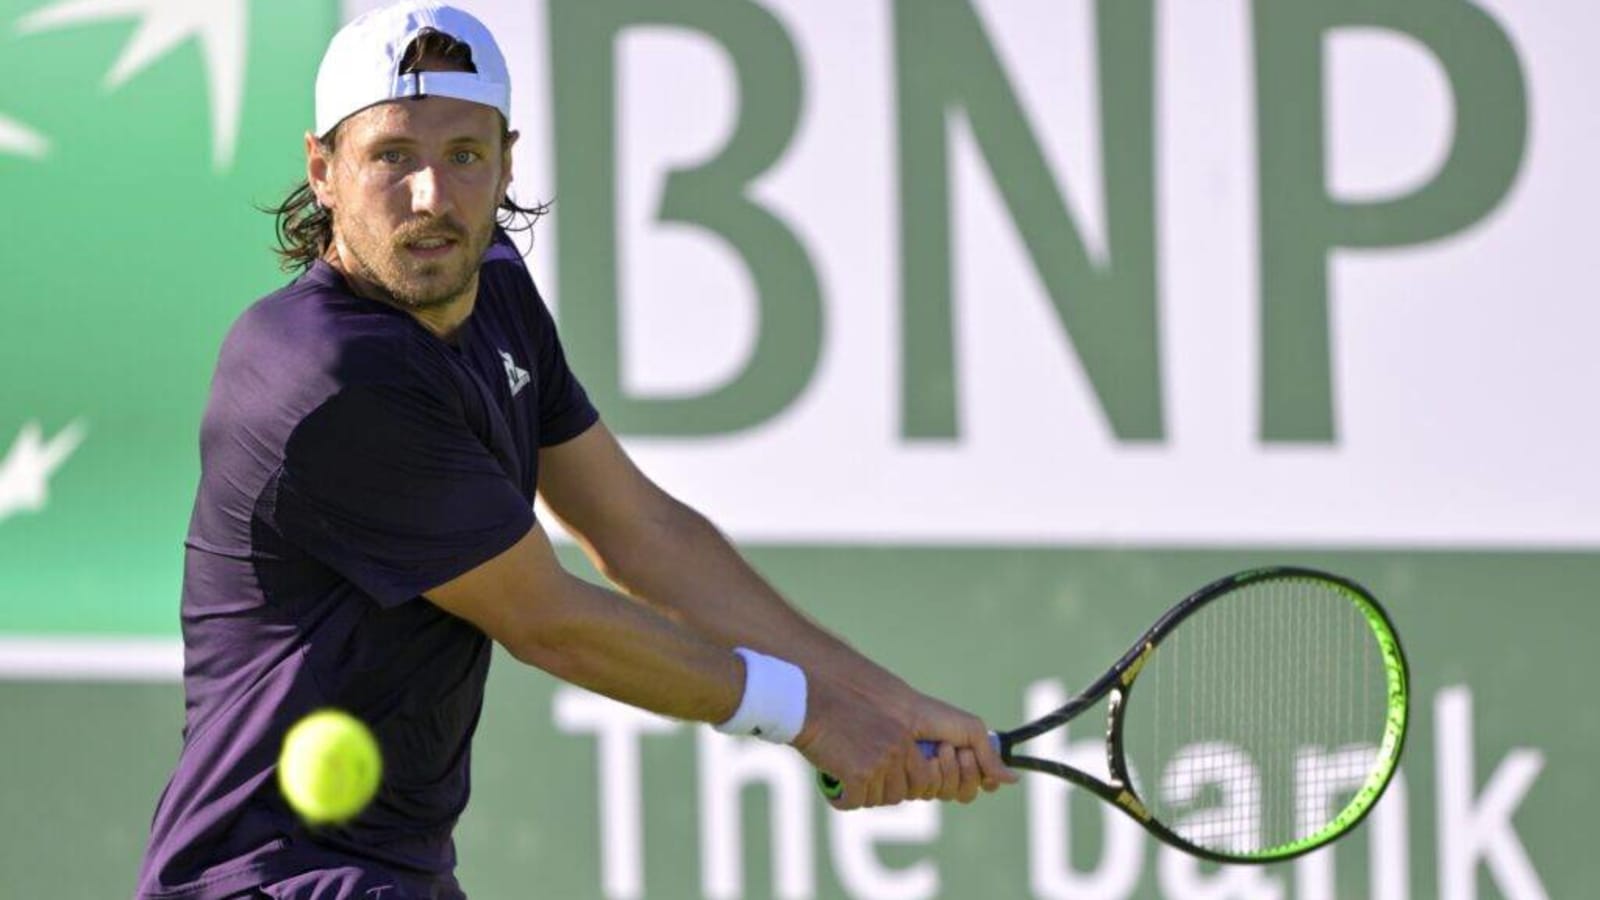 Challenger Tour Weekly Recap: Pouille and Vesely Back in the Winners’ Circle